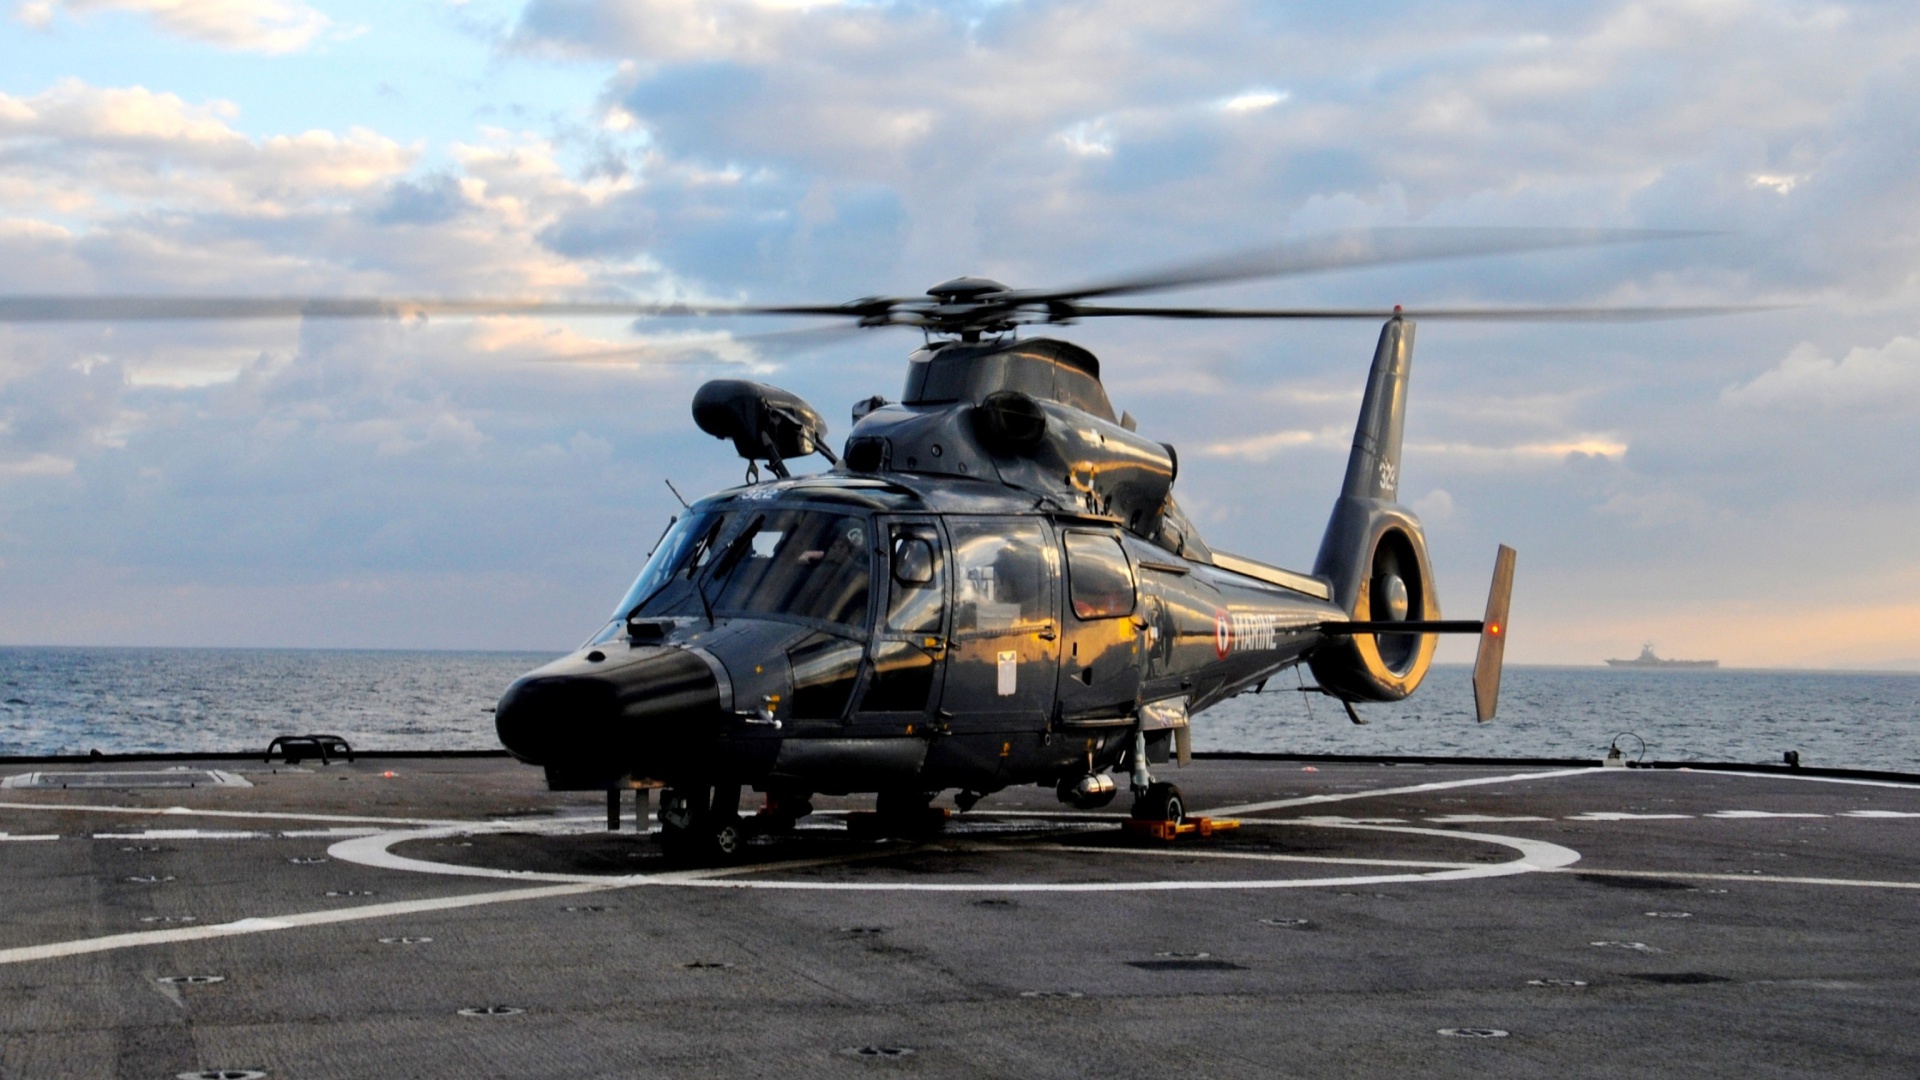 Обои Helicopter on Aircraft Carrier 1920x1080